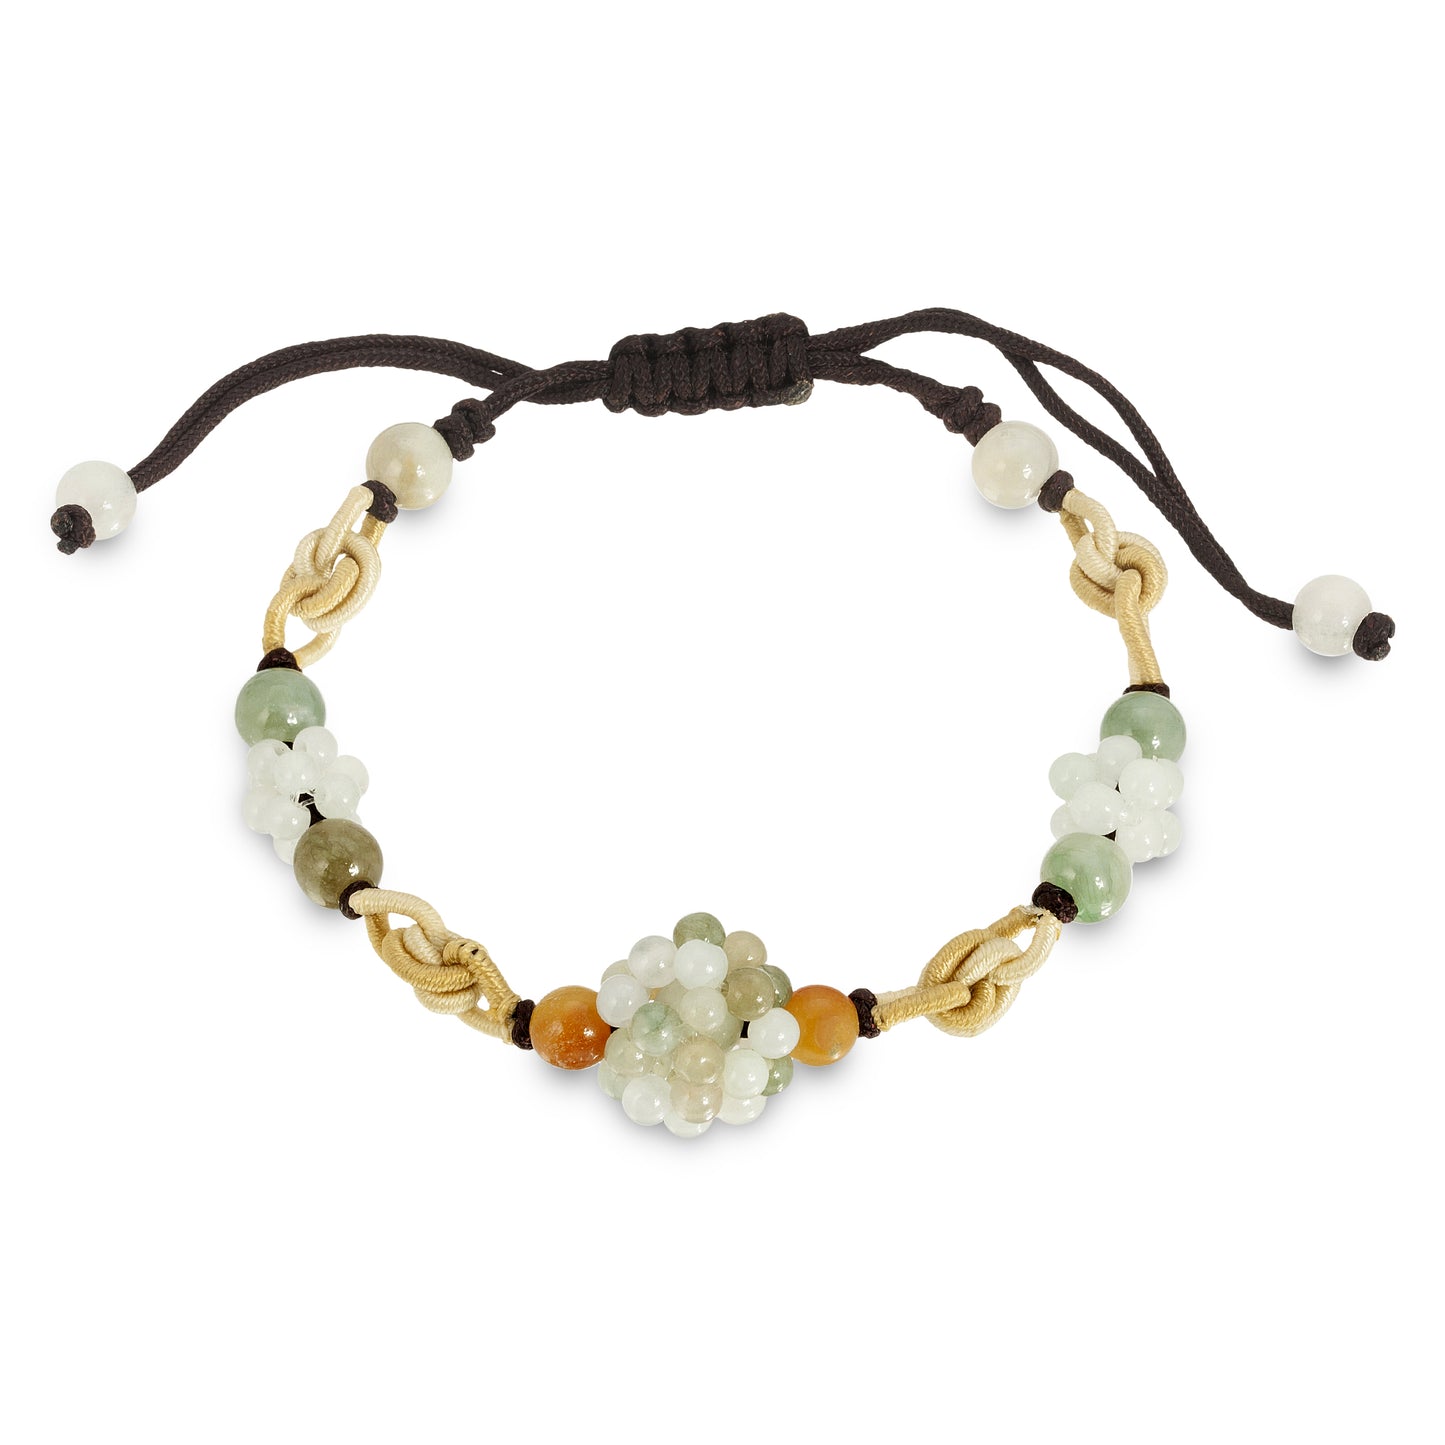 Wear a Splash of Colors with One-of-a-kind Vibrant Jade Beads Bracelet